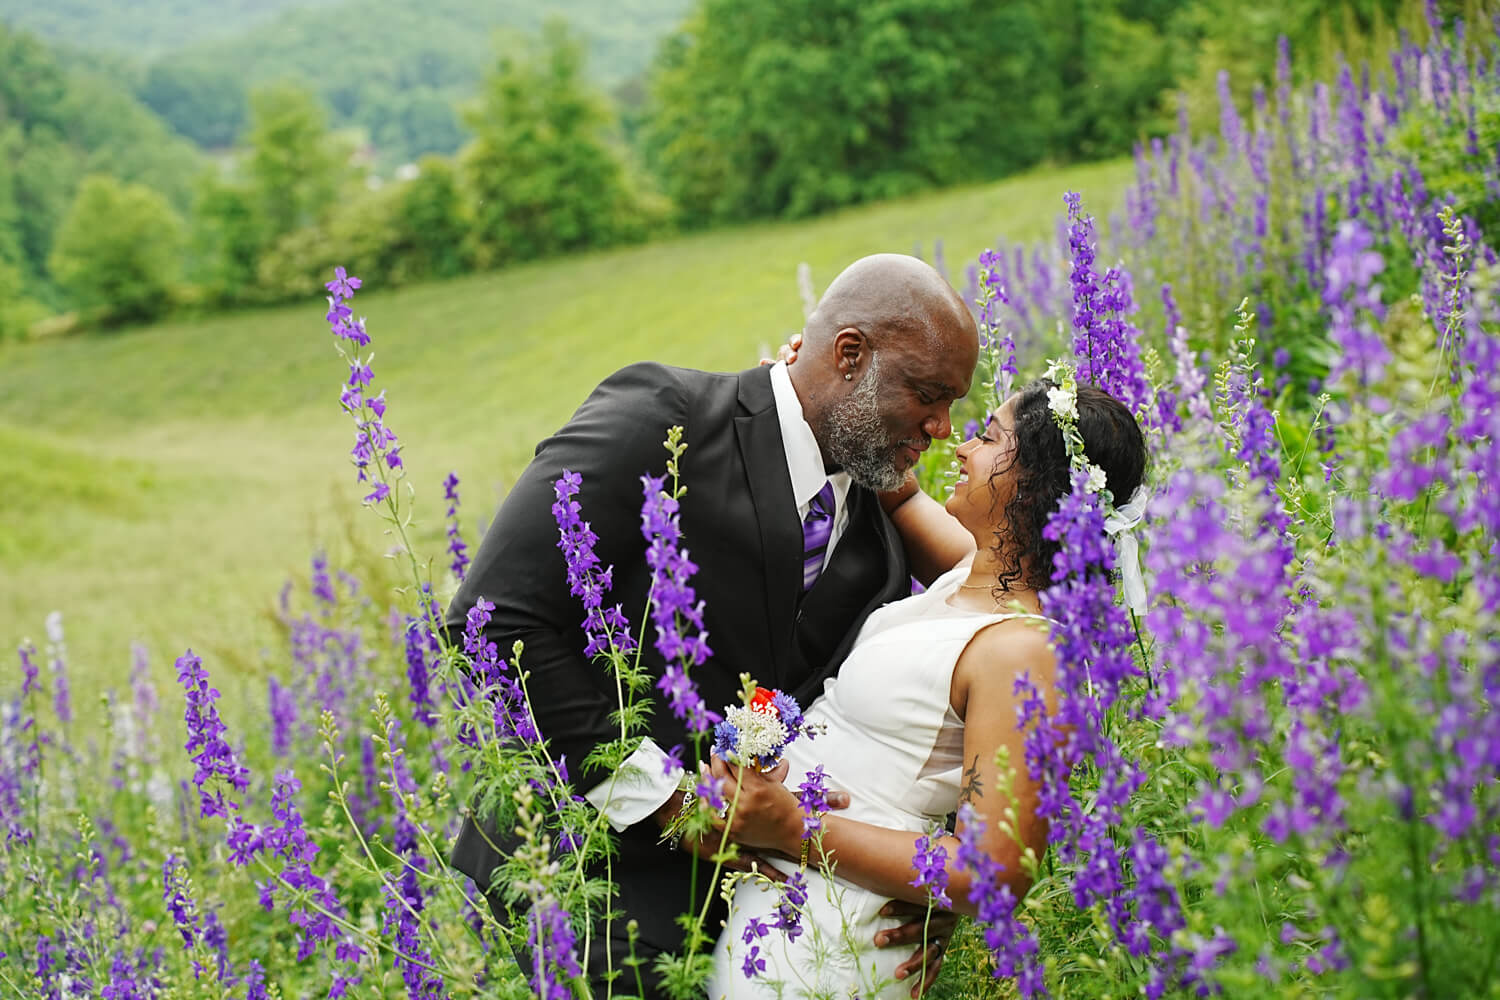 Romantic couple in a field of purple blooming larkspur